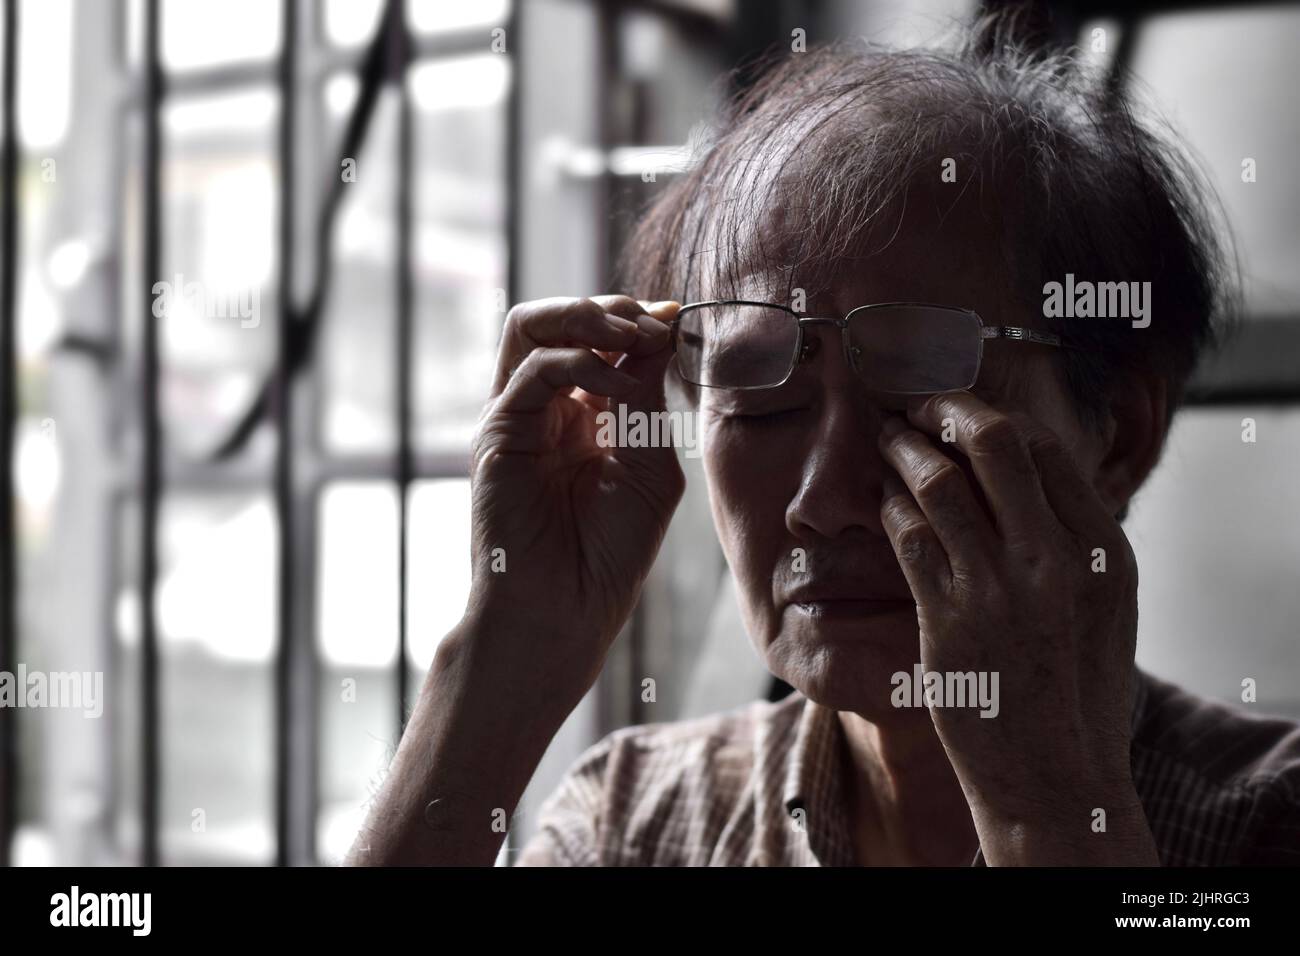 Partial silhouette image of Asian elder man rubbing his eye. Concept of eye pain, strain or itchy eyelid. Stock Photo